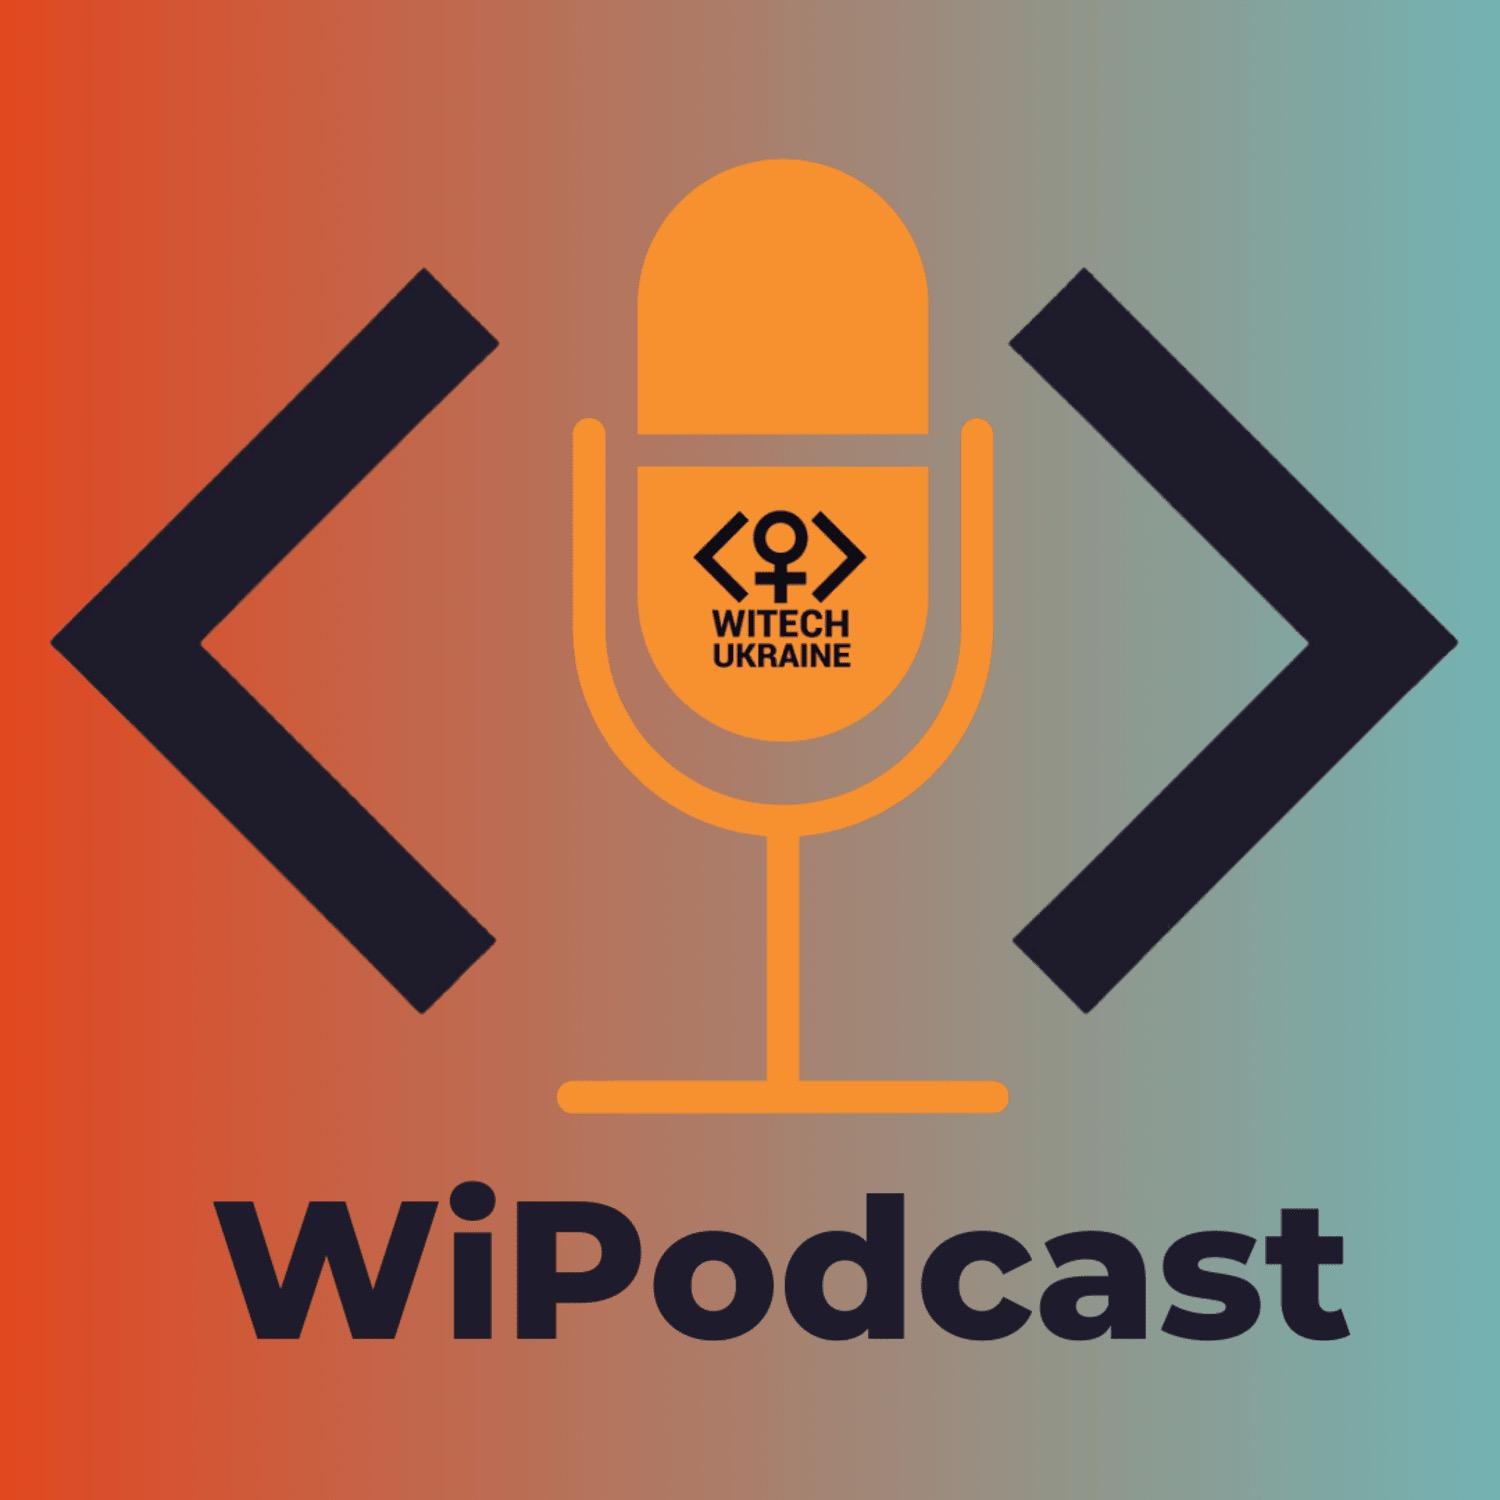 WiPodcast